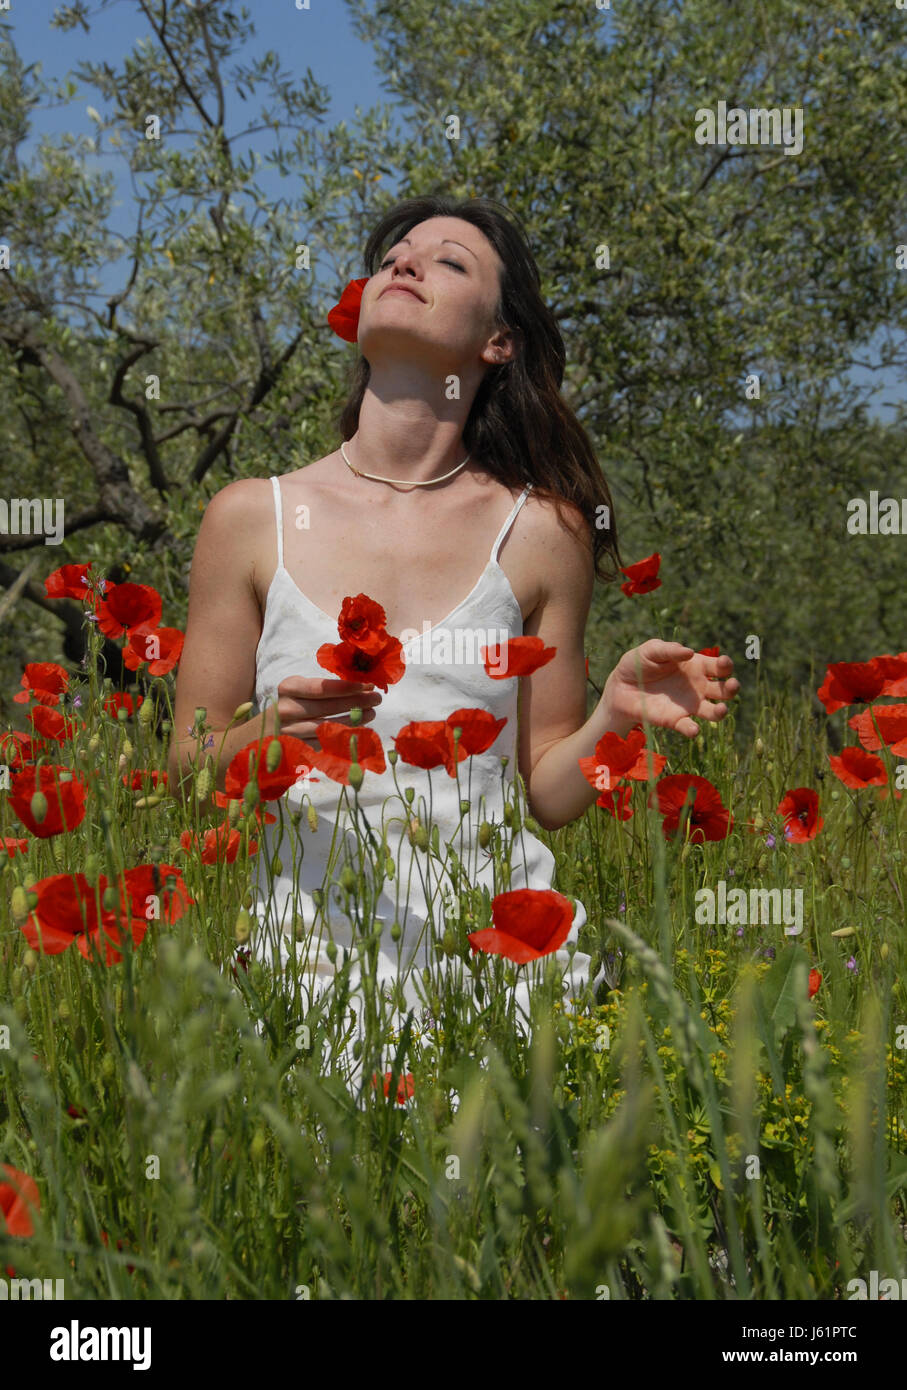 woman field flower flowers plant spring teenager happiness beauty laugh laughs Stock Photo